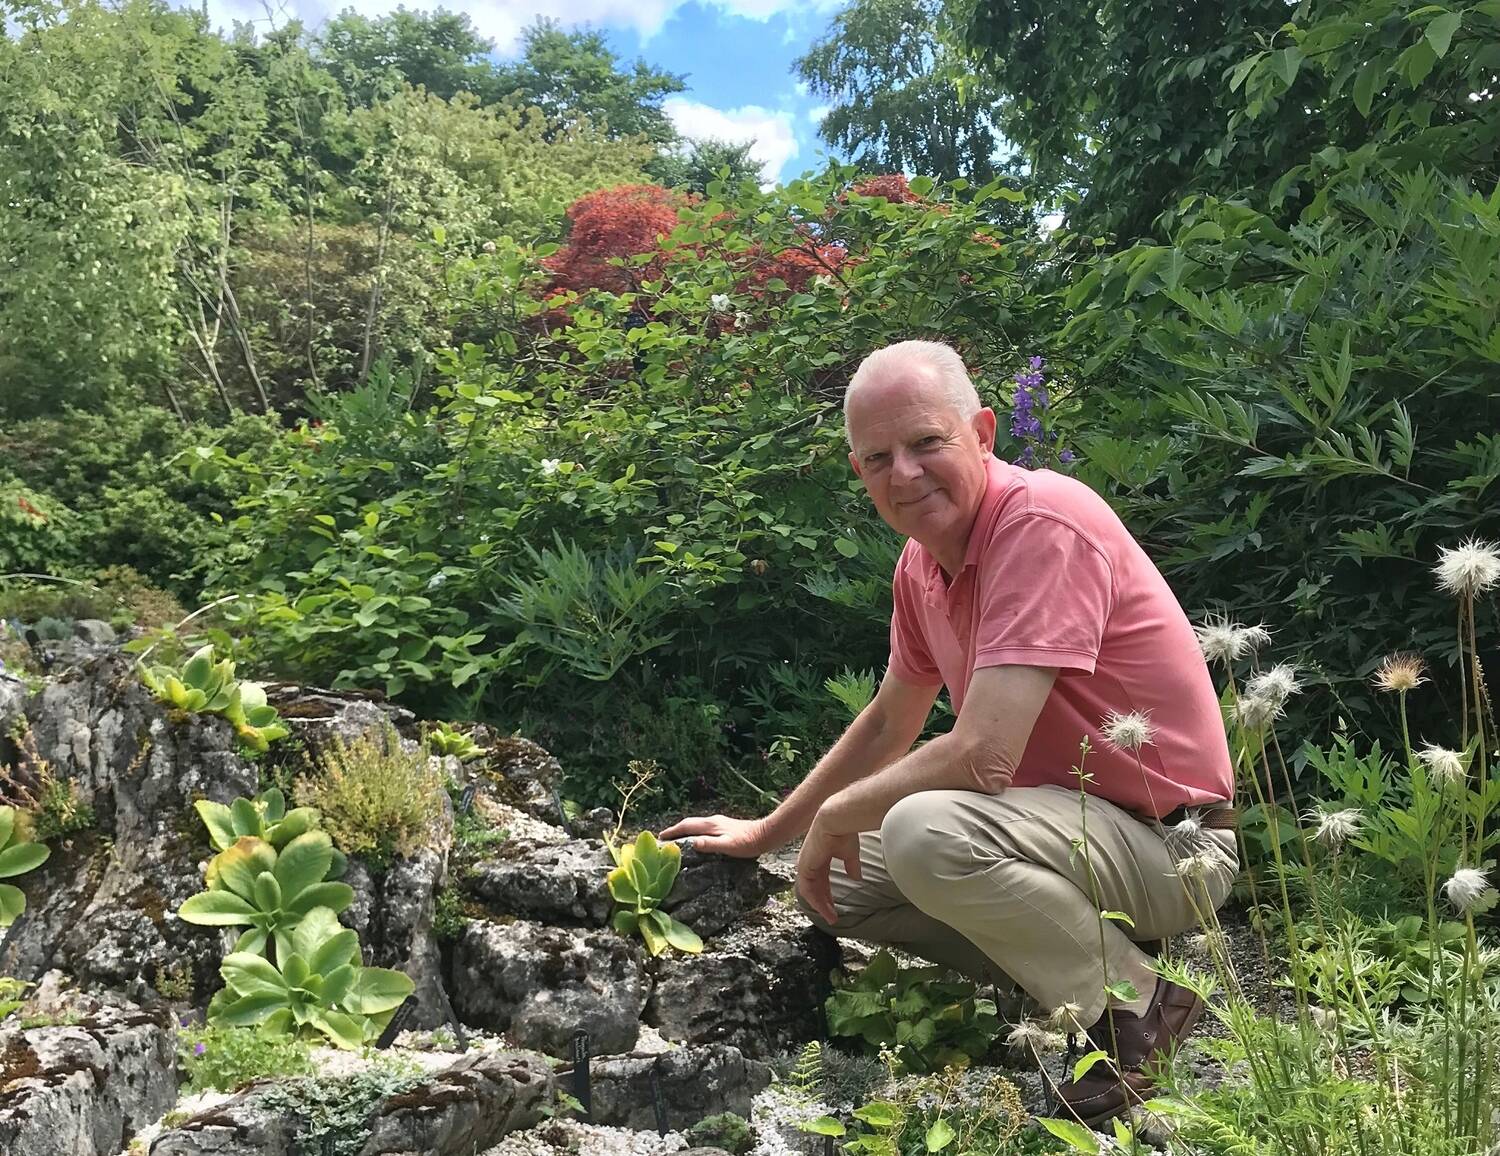 A man in a pink shirt and pale brown trousers crouches beside a rock garden, with many different types of green plants growing around him. Tall trees can be seen in the background.